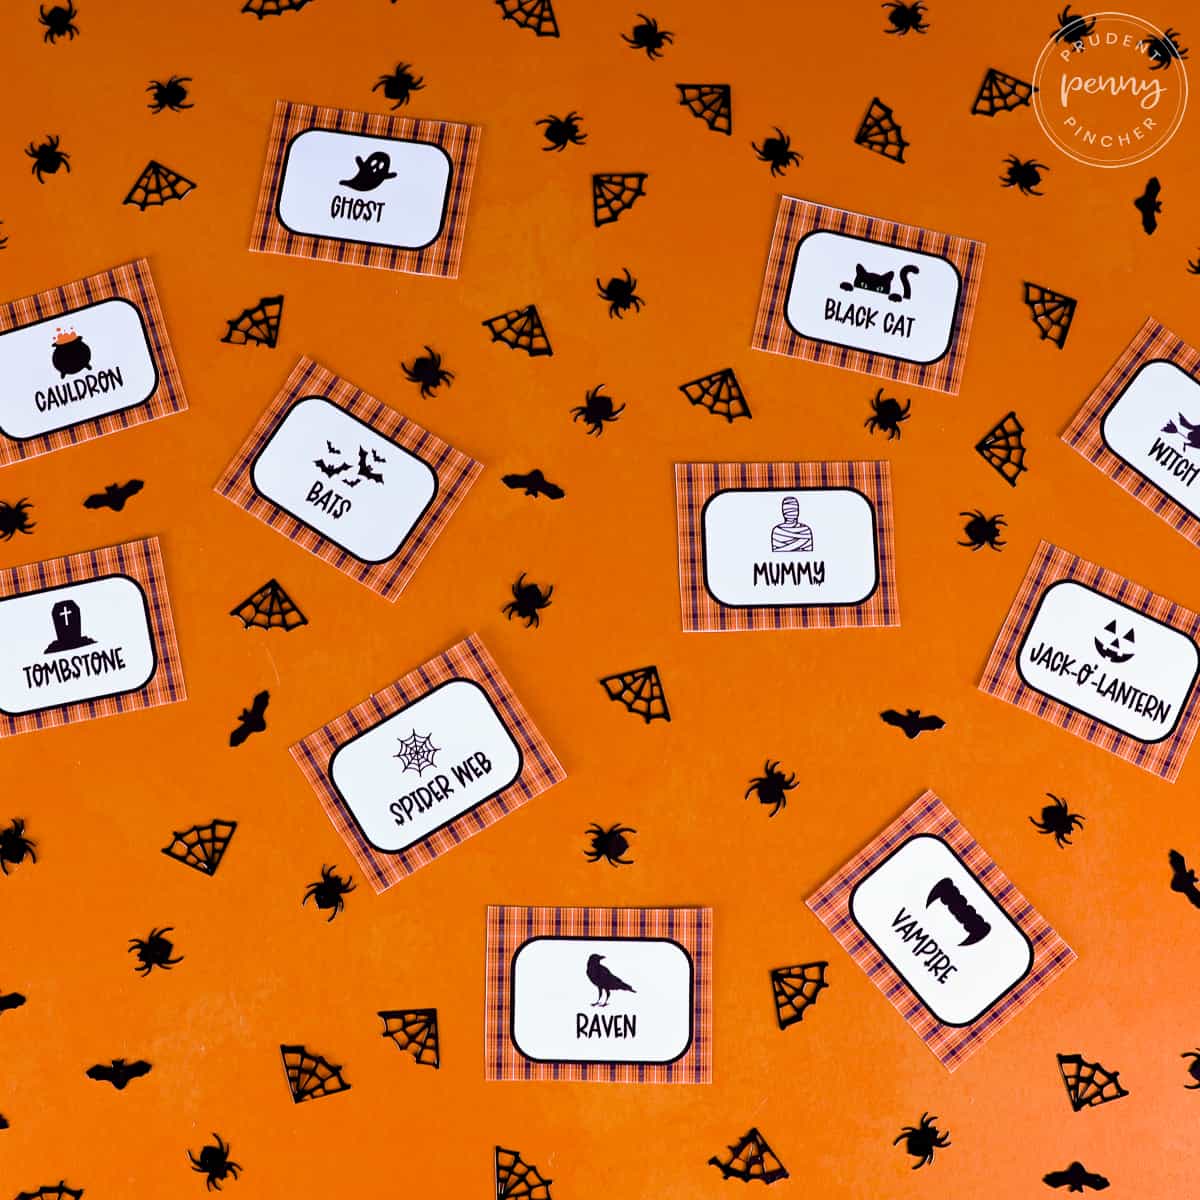 charades cards on orange background with black confetti